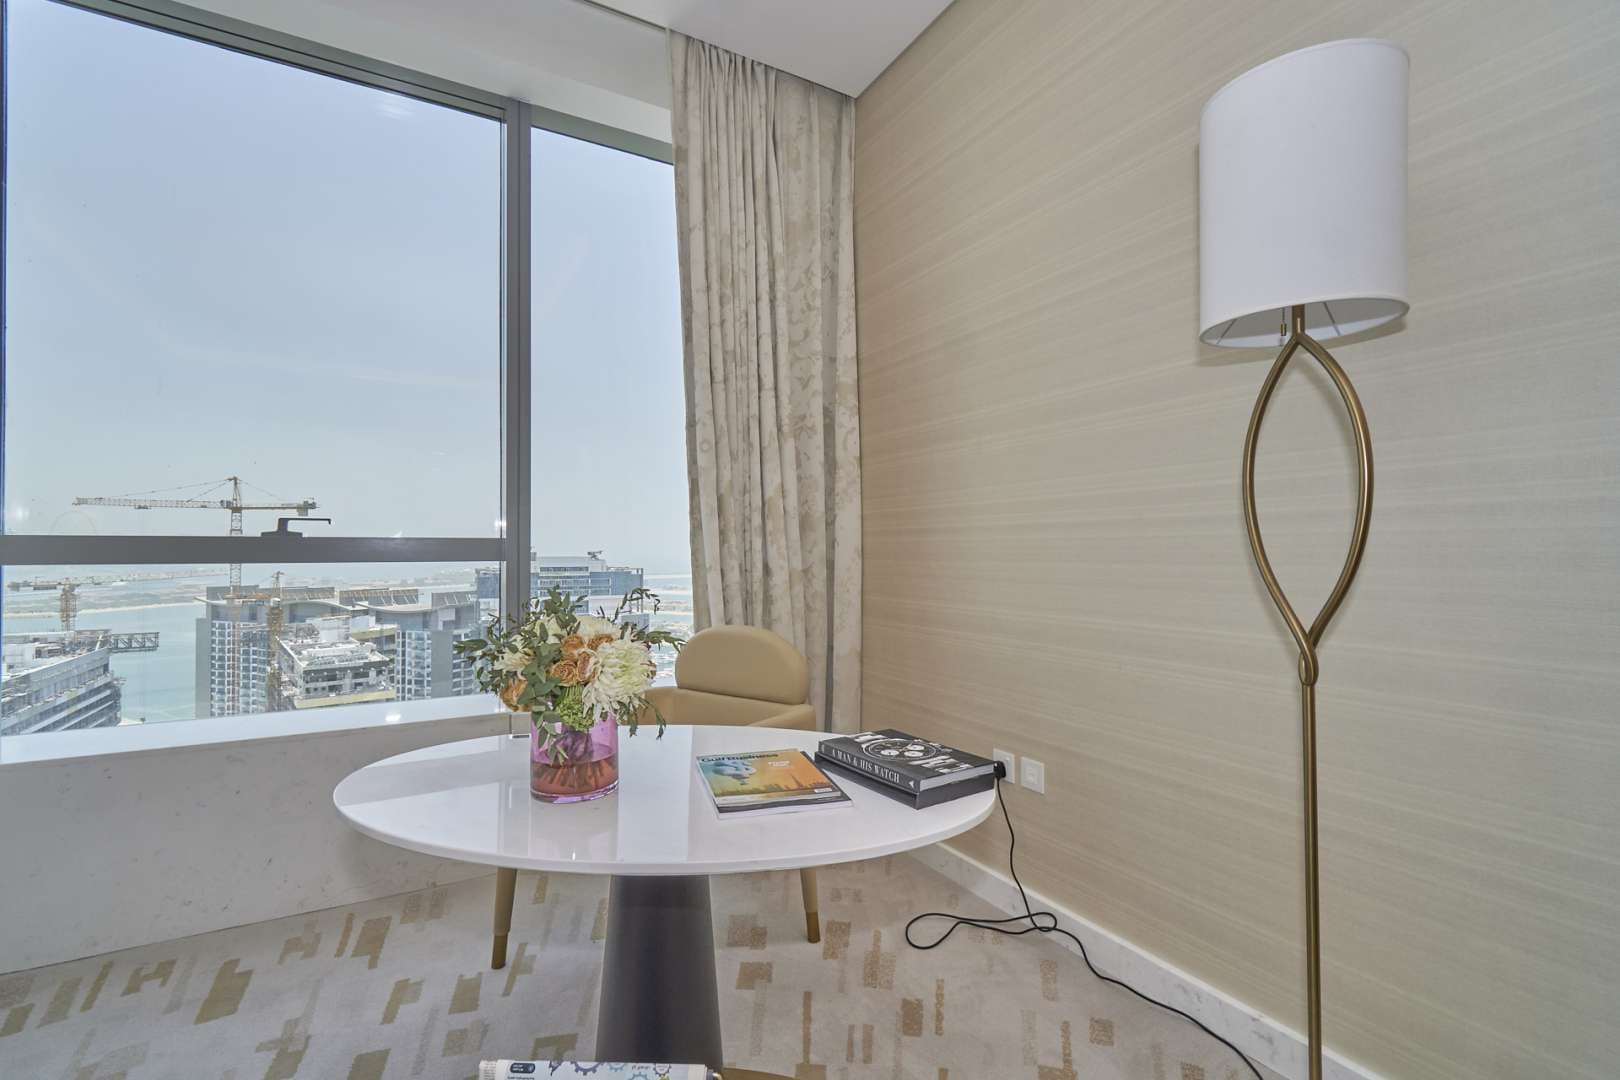 Studio Bedroom Apartment For Sale The Palm Tower Lp04013 1474bd631a47c600.jpg